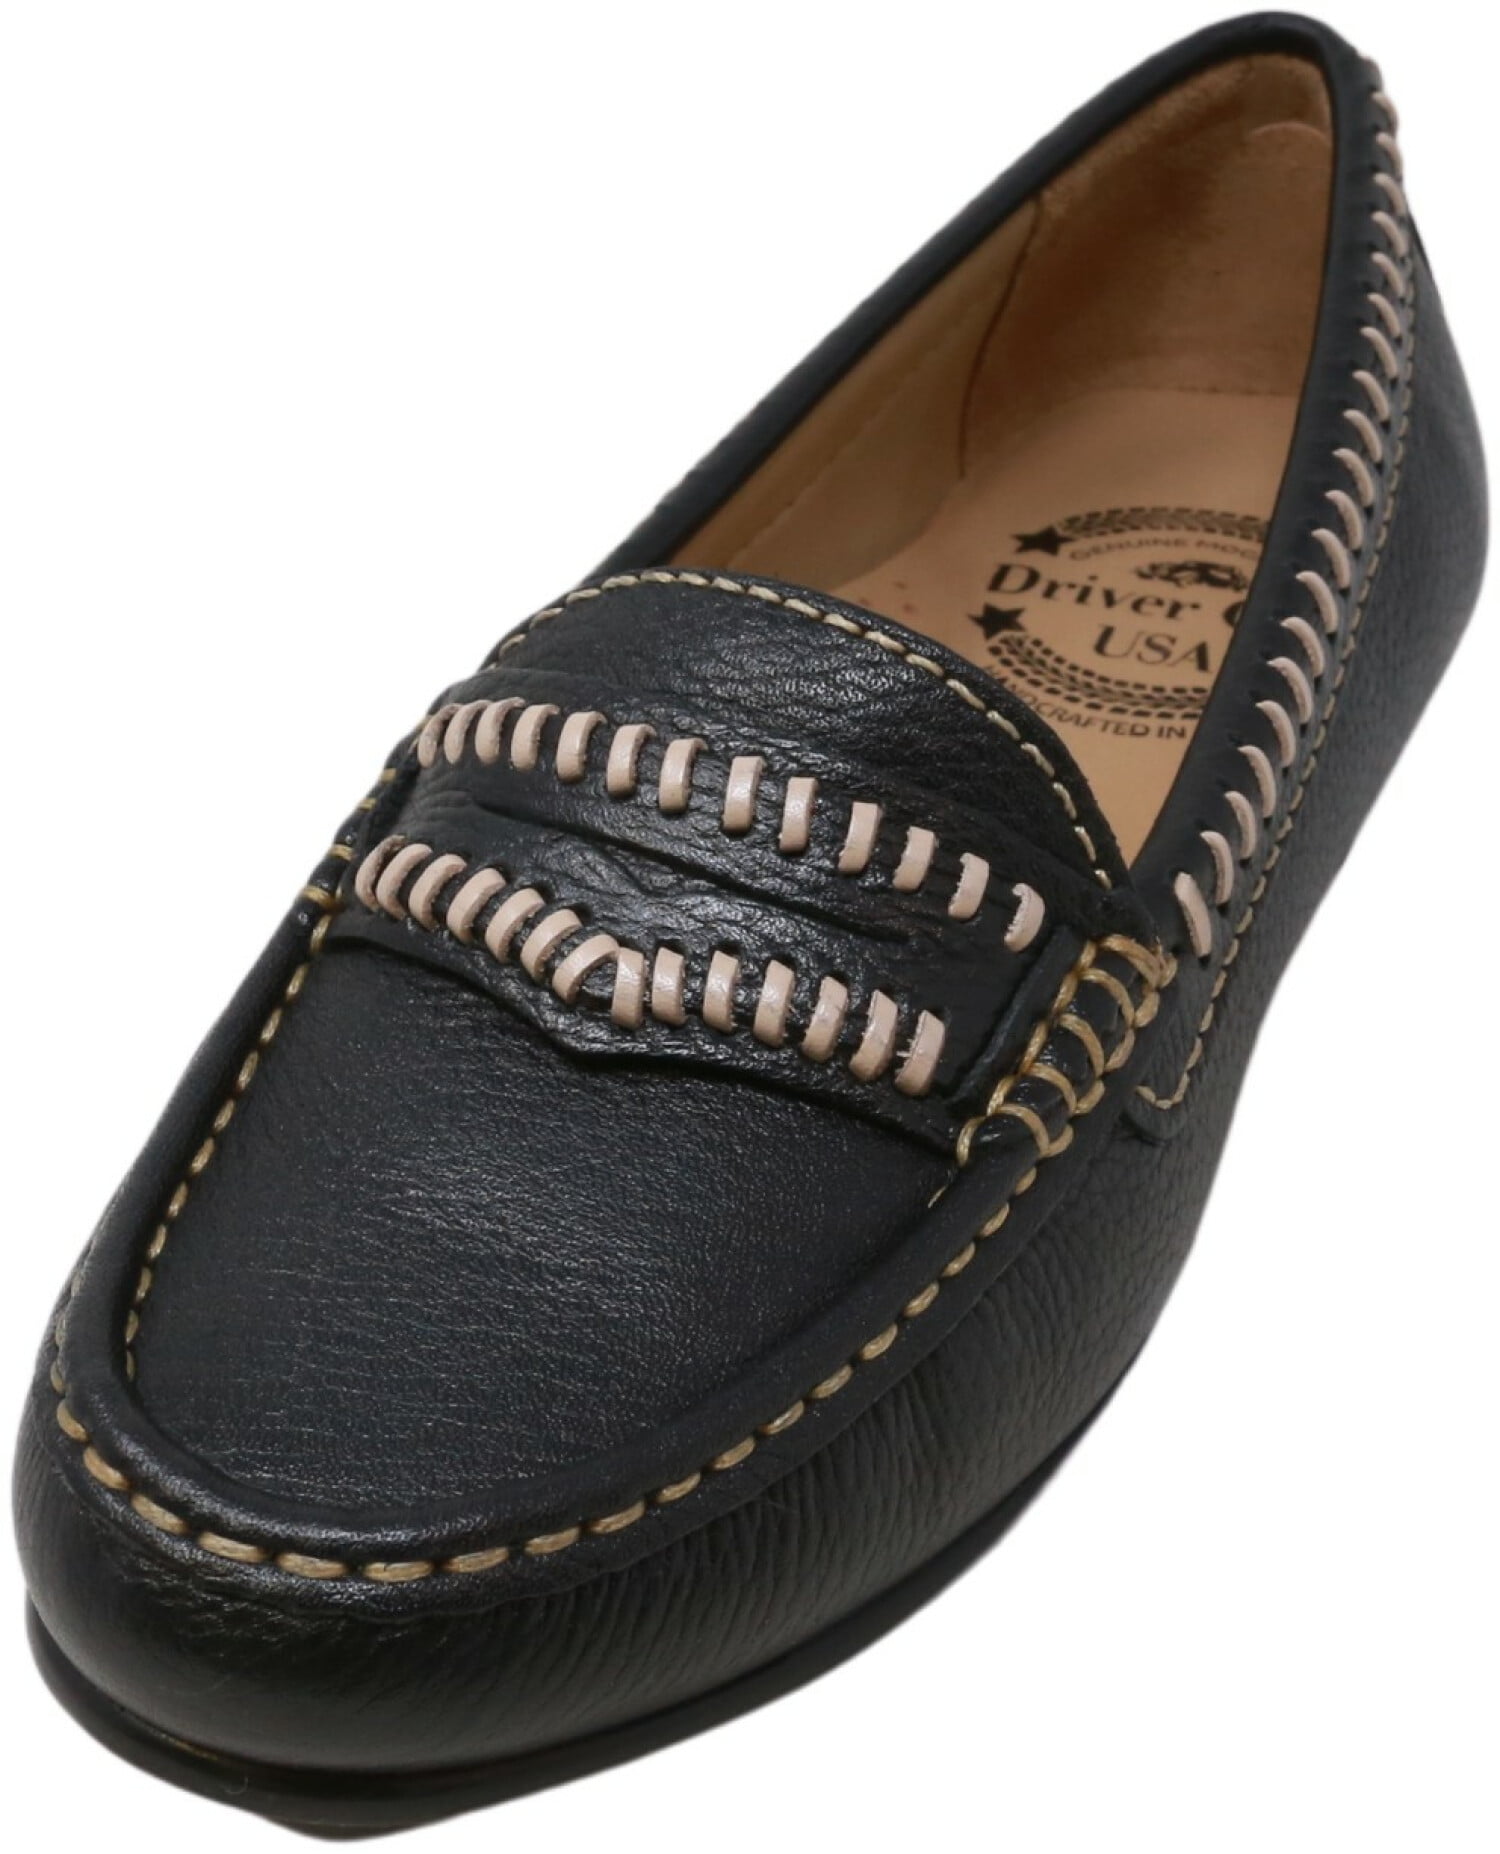 Driver Club USA Womens Leather Made in Brazil Maple Ave Loafer